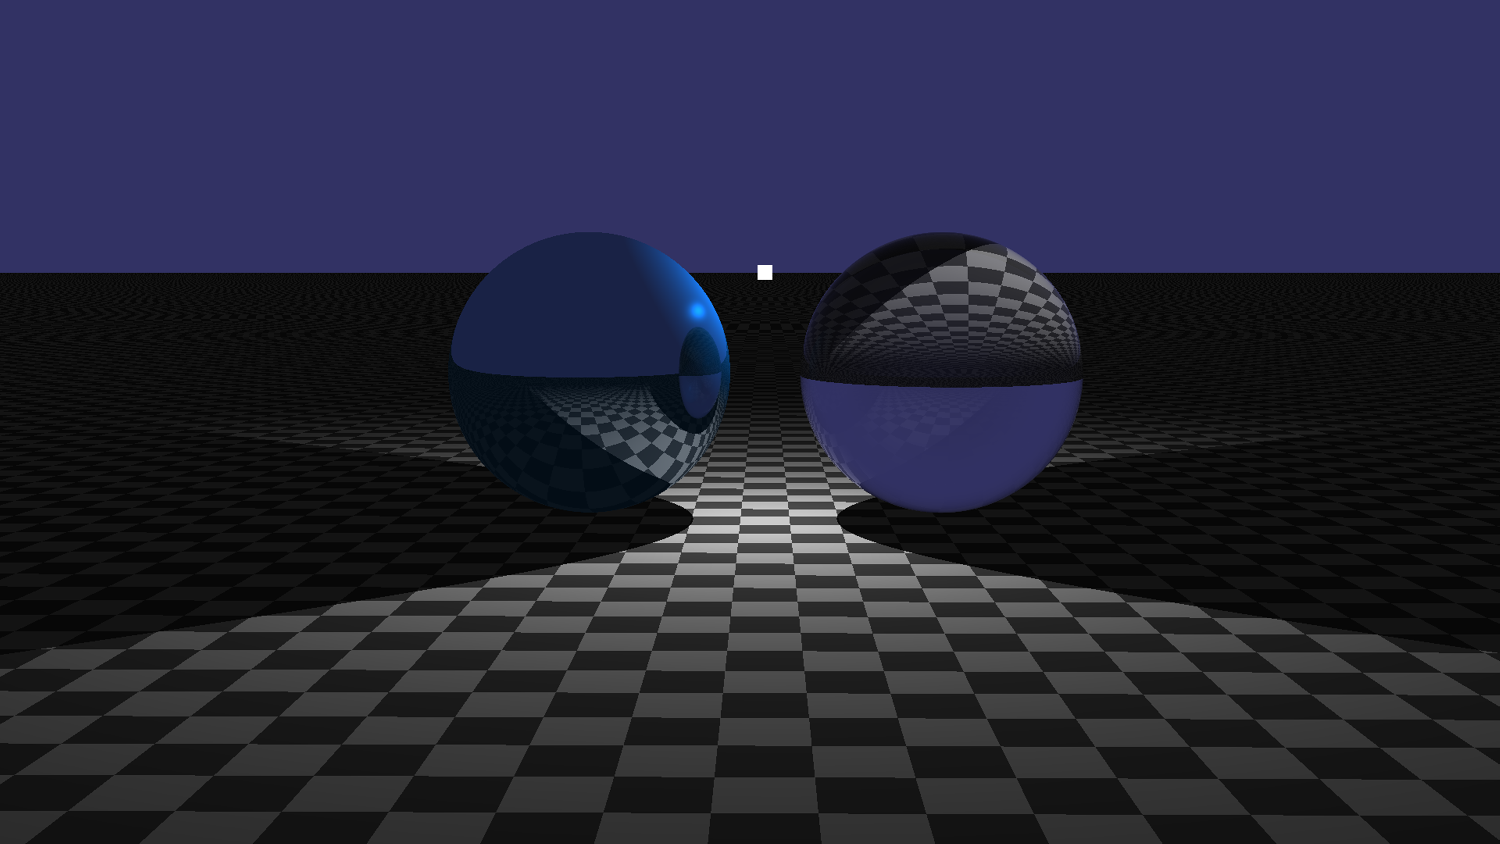 Refraction being showcased in a simple scene. The left sphere reflects and the right sphere refracts